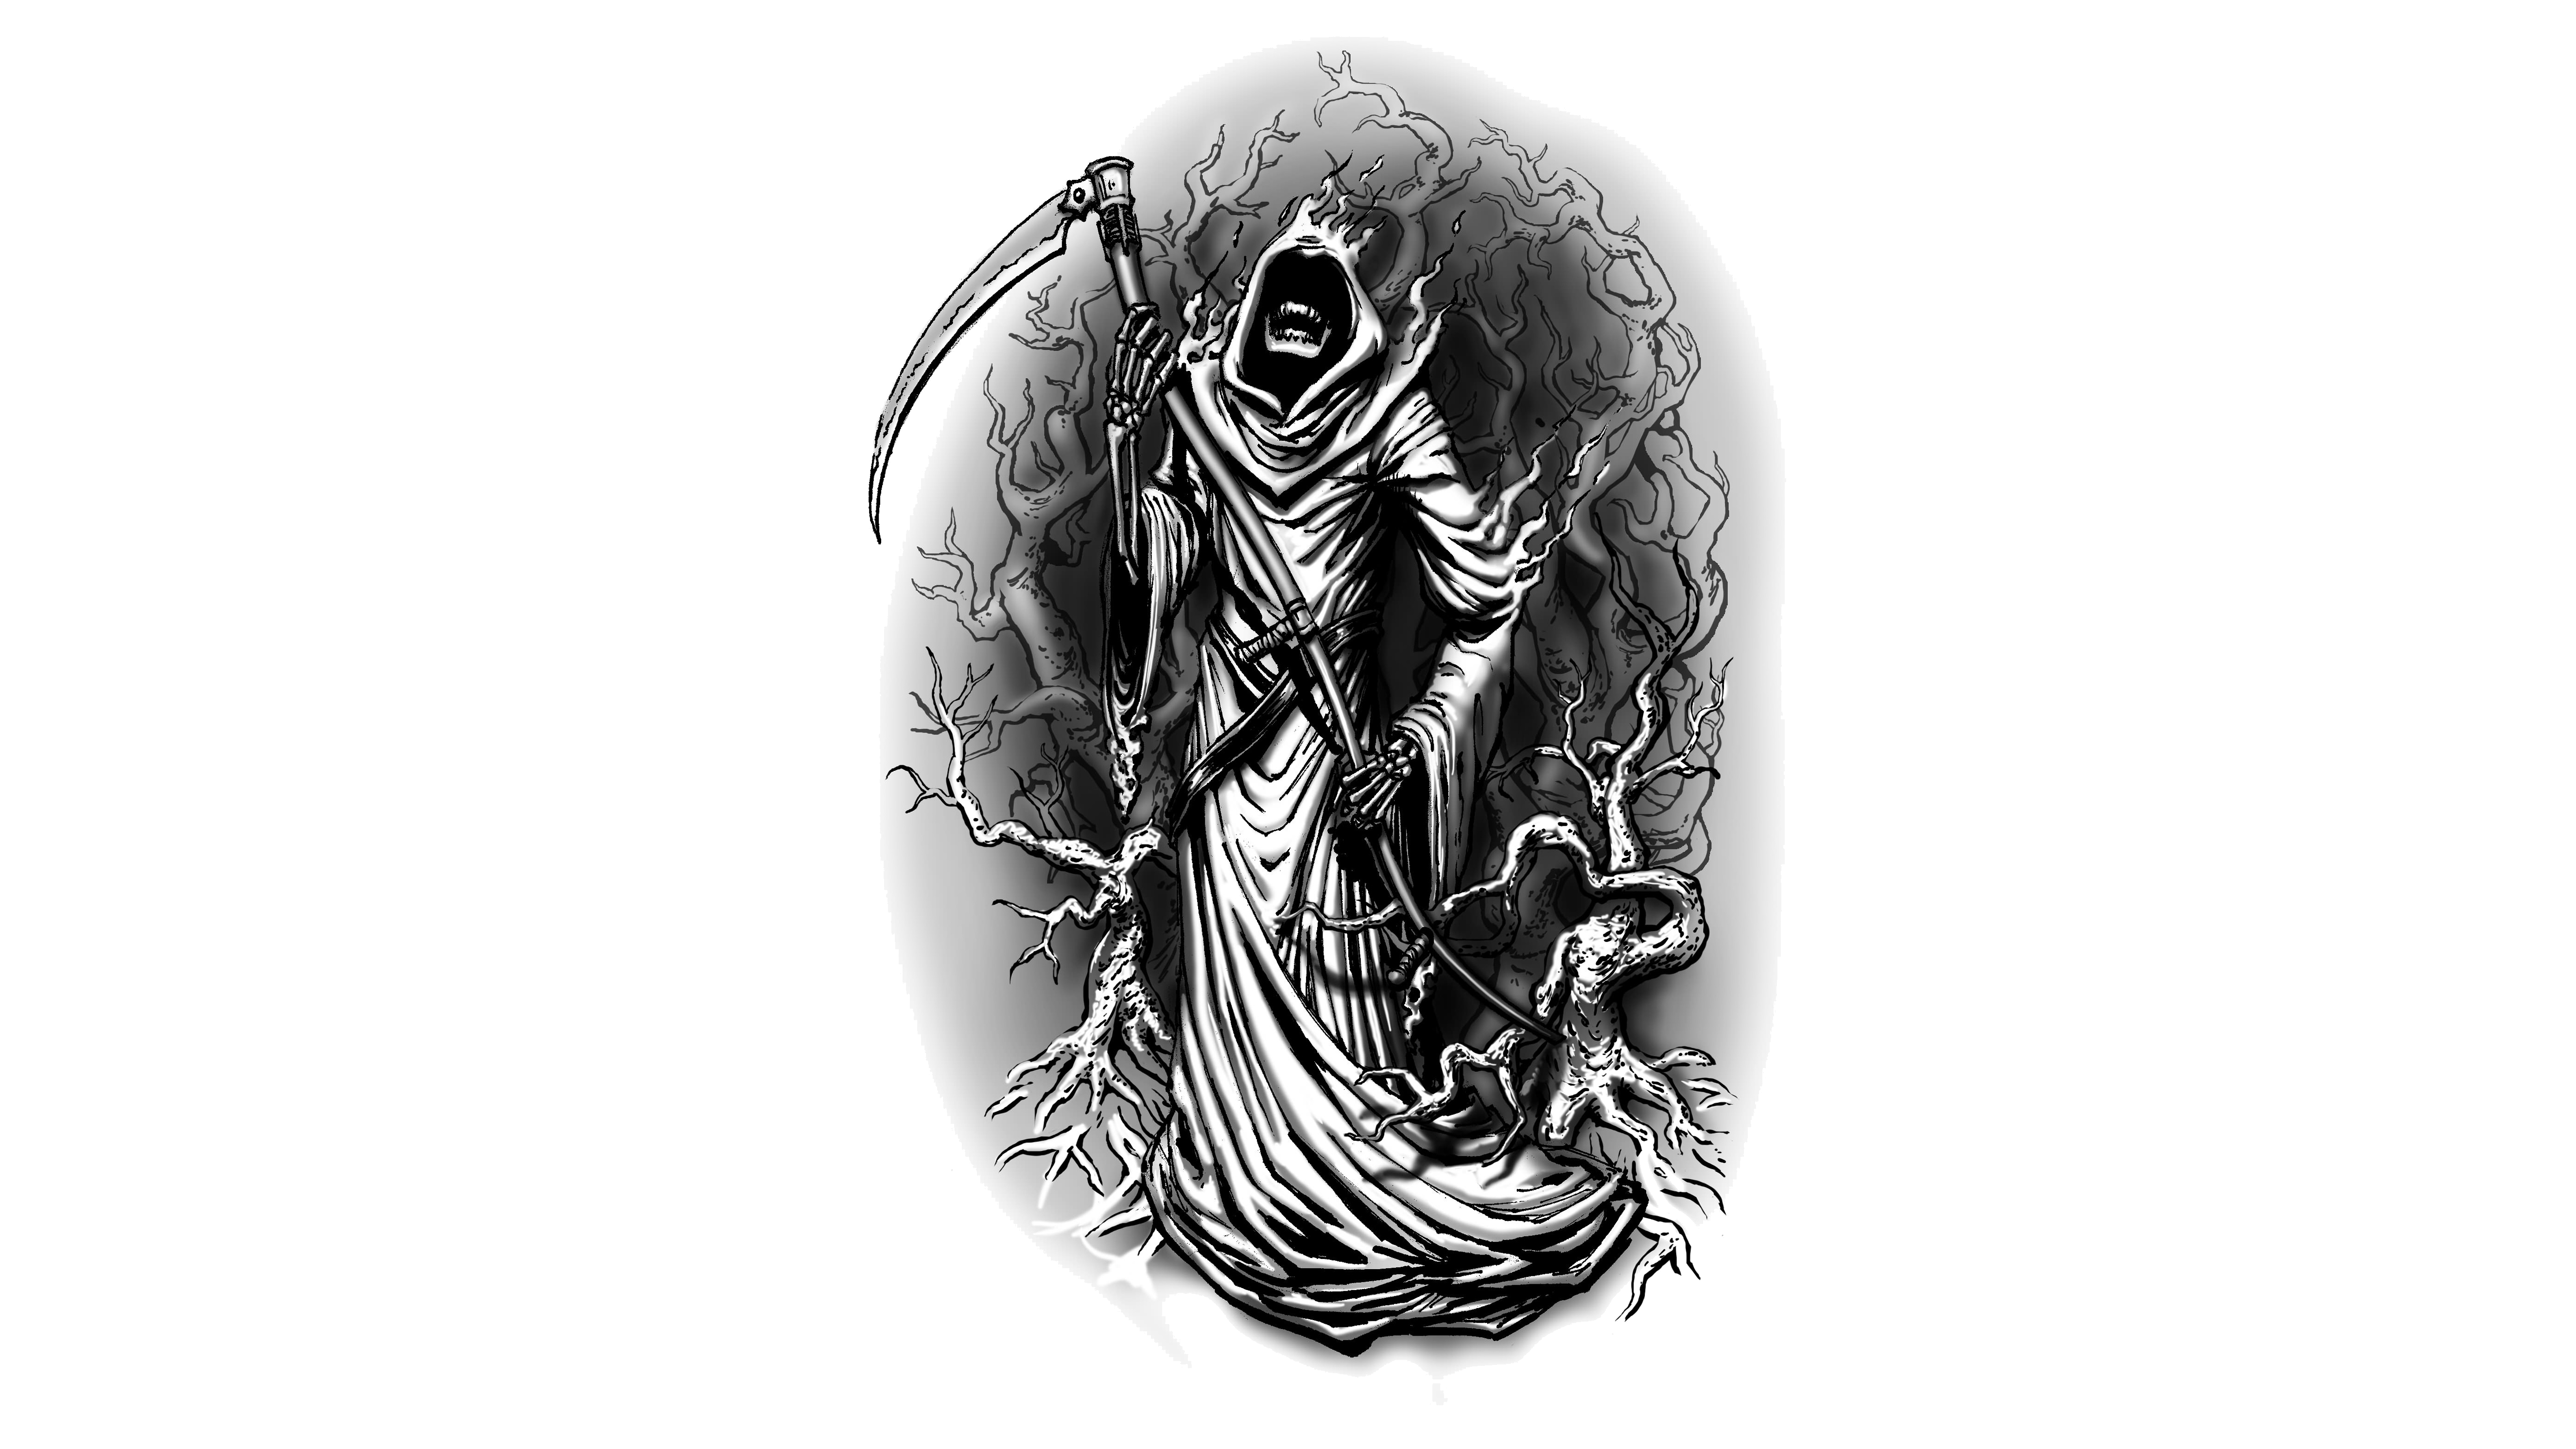 Grim Reaper Tattoo Posters for Sale | Redbubble